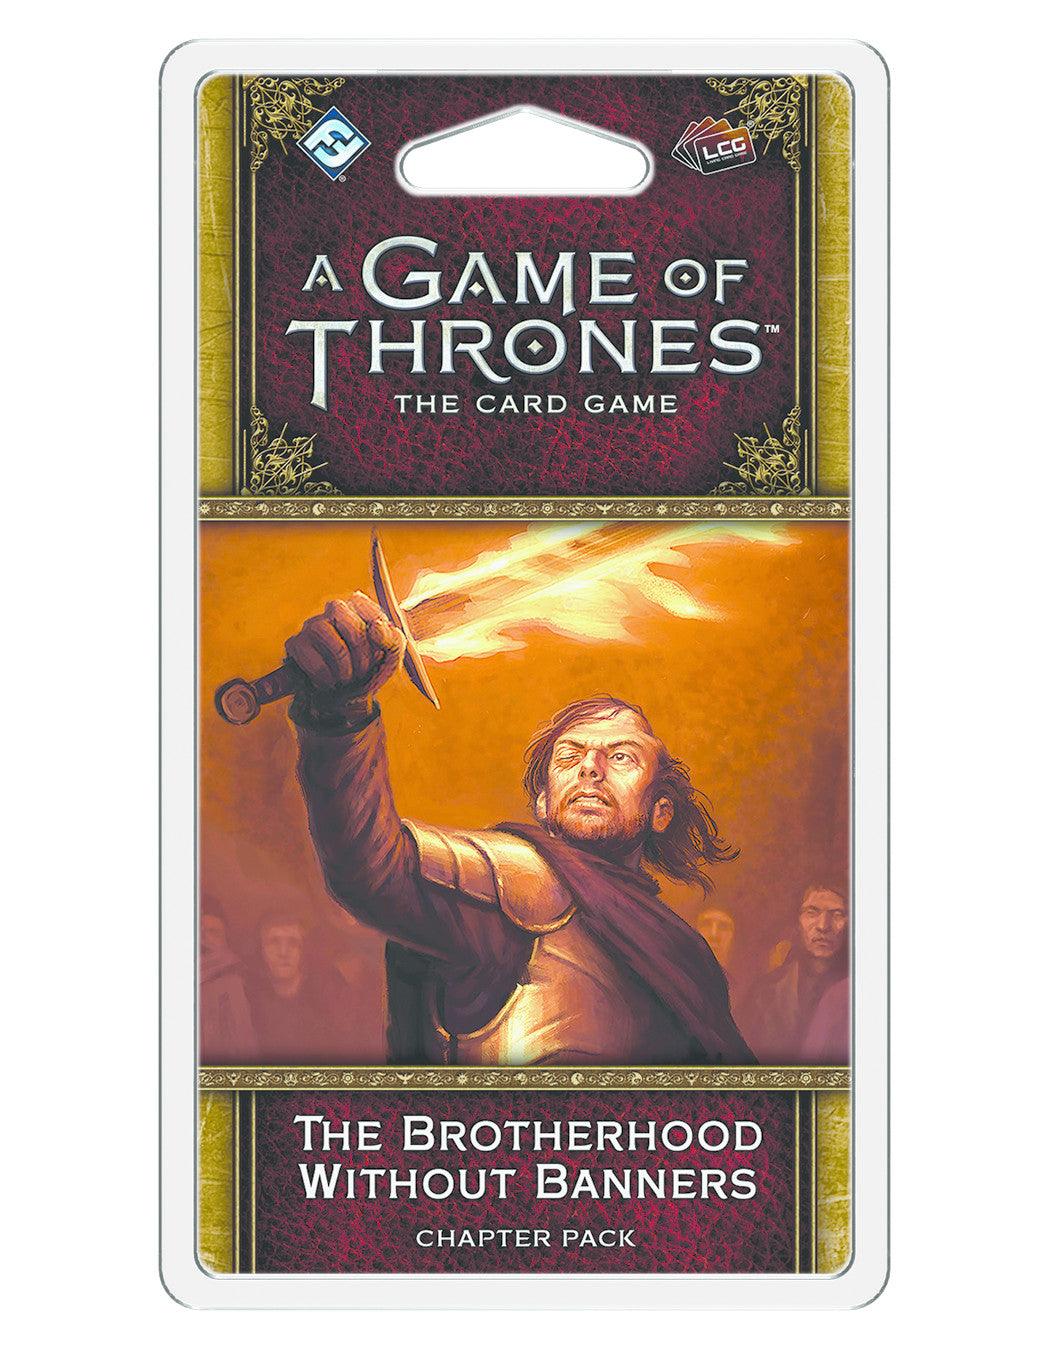 VR-43511 A Game of Thrones LCG The Brotherhood Without Banners - Fantasy Flight Games - Titan Pop Culture